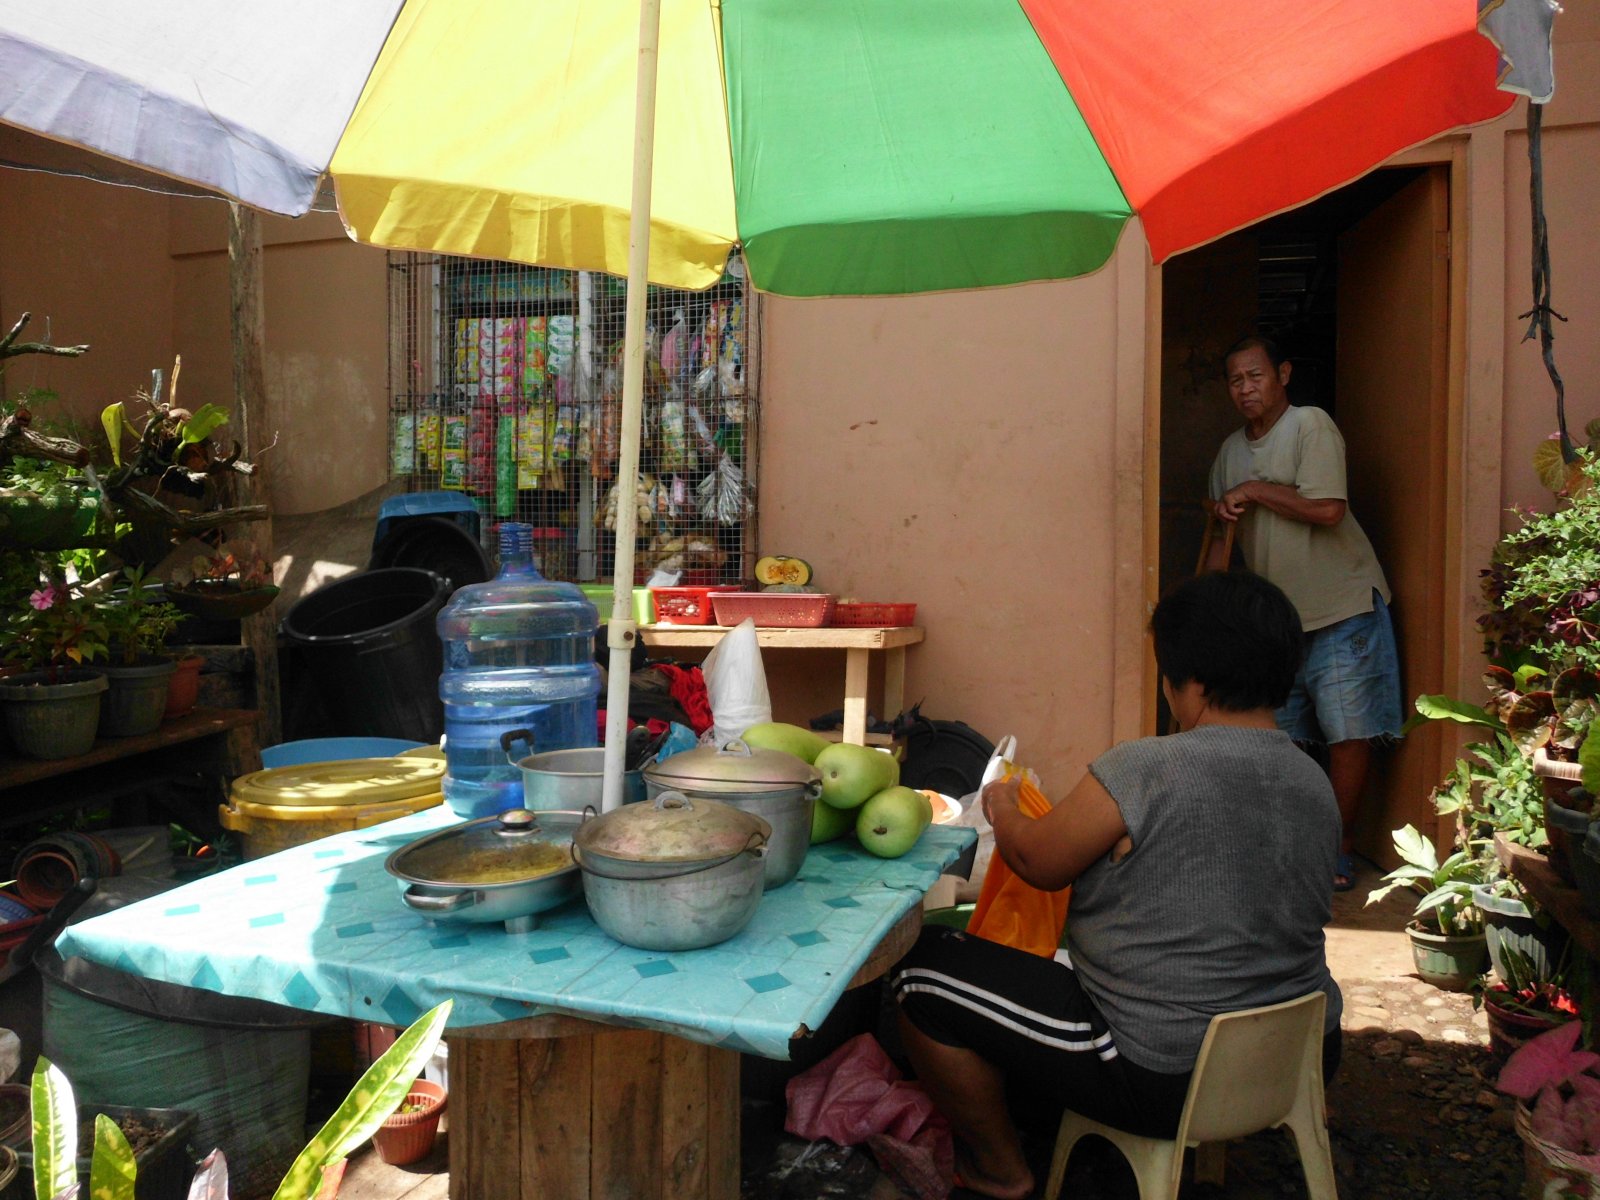 The front yard at the Ecoville Resettlement becomes a breakfast nook where residents can buy ready-made meals. Photo by libudsuroy.CreativeCommons